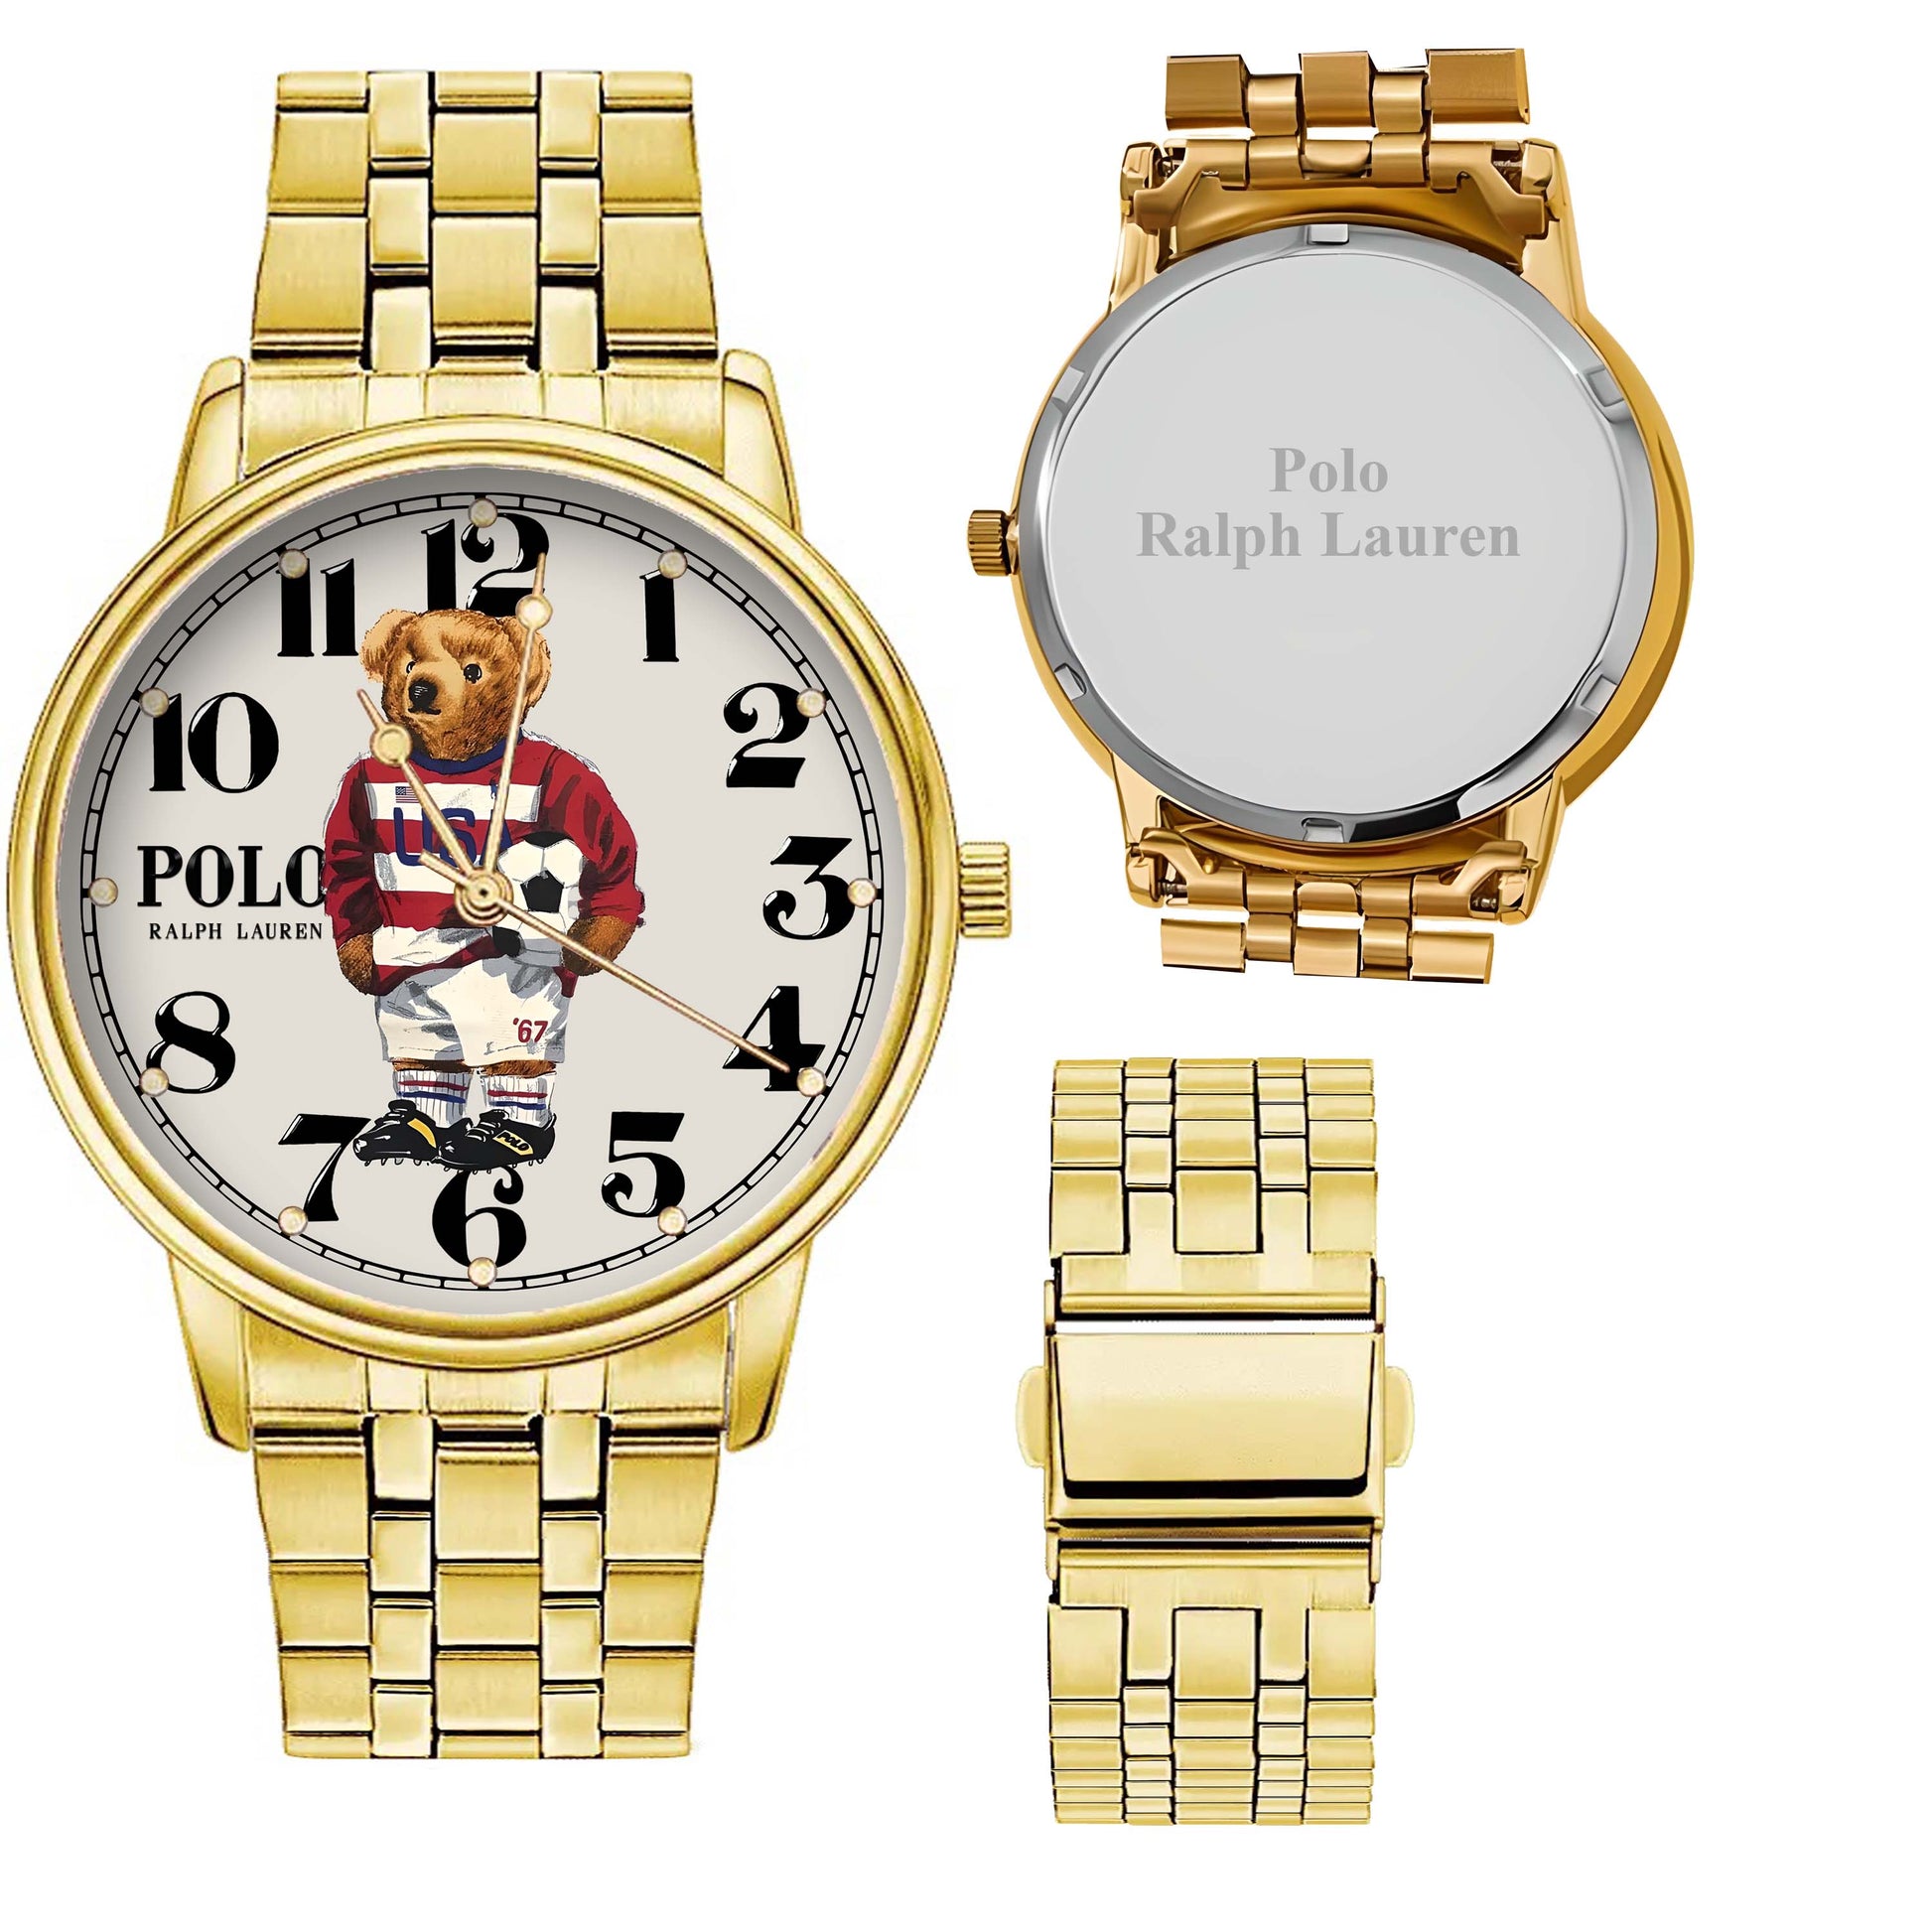 Polo Mls Soccer Bear Watches Nm29.16